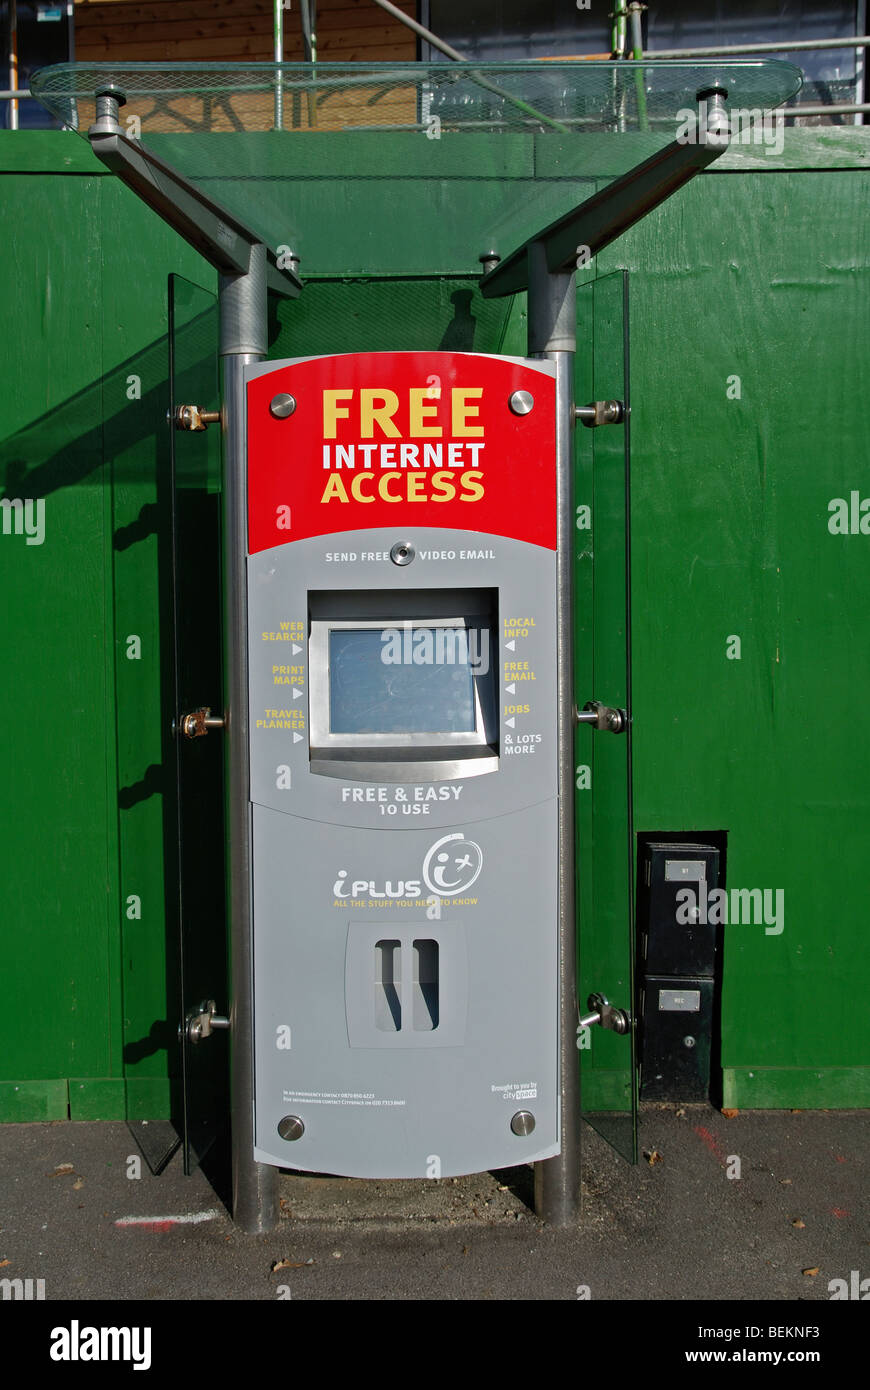 a free access internet machine in a street in redruth,cornwall,uk Stock Photo